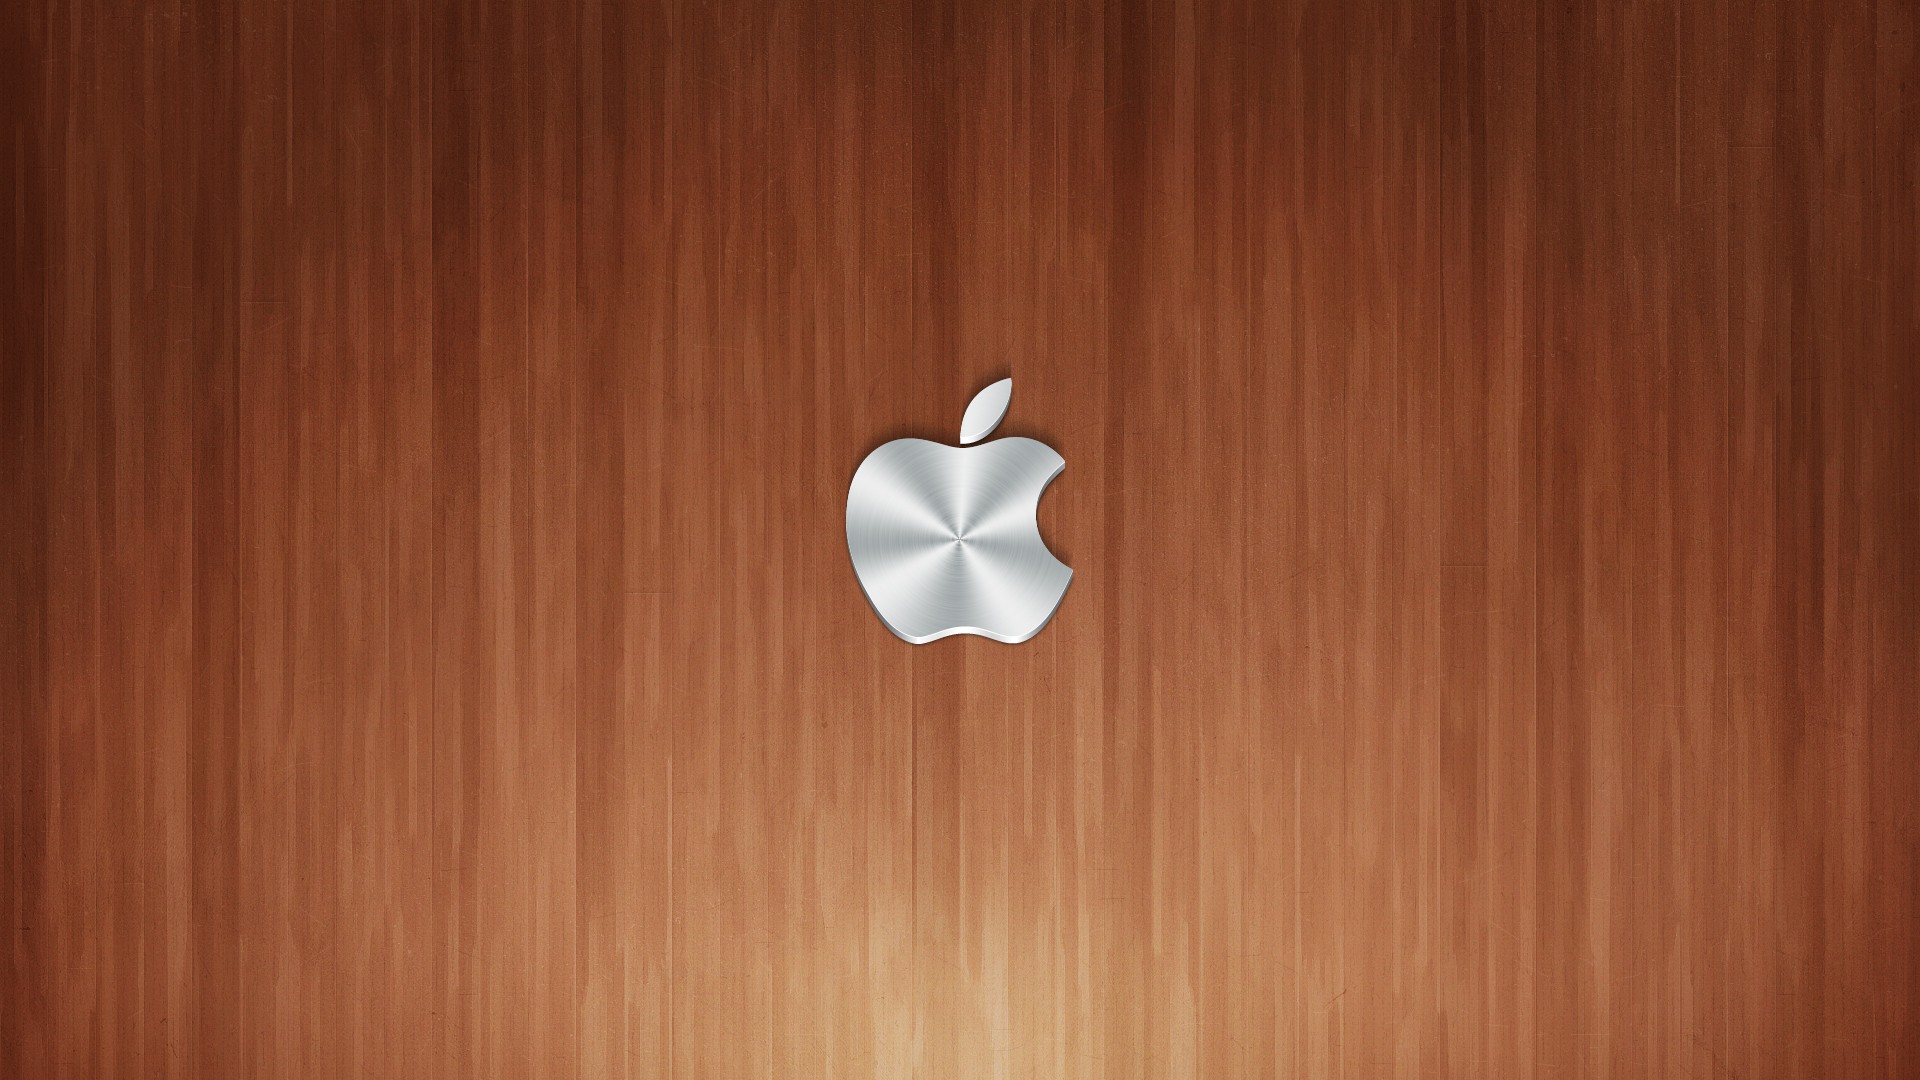 Free download apple inc logos best widescreen background awesome b84F ...